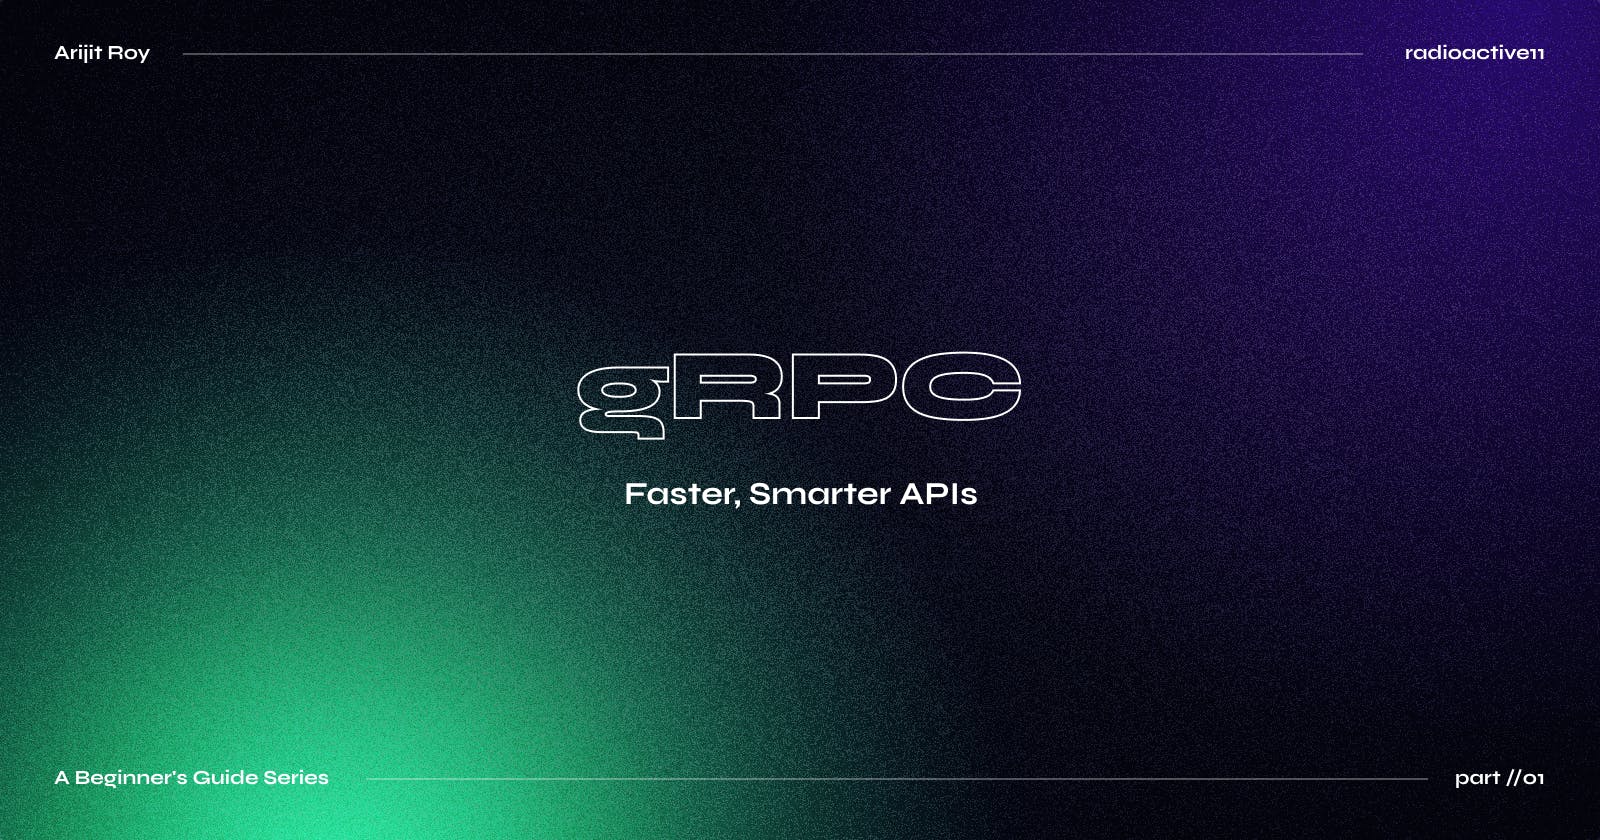 A Beginner's Guide to gRPC: Faster, Smarter APIs